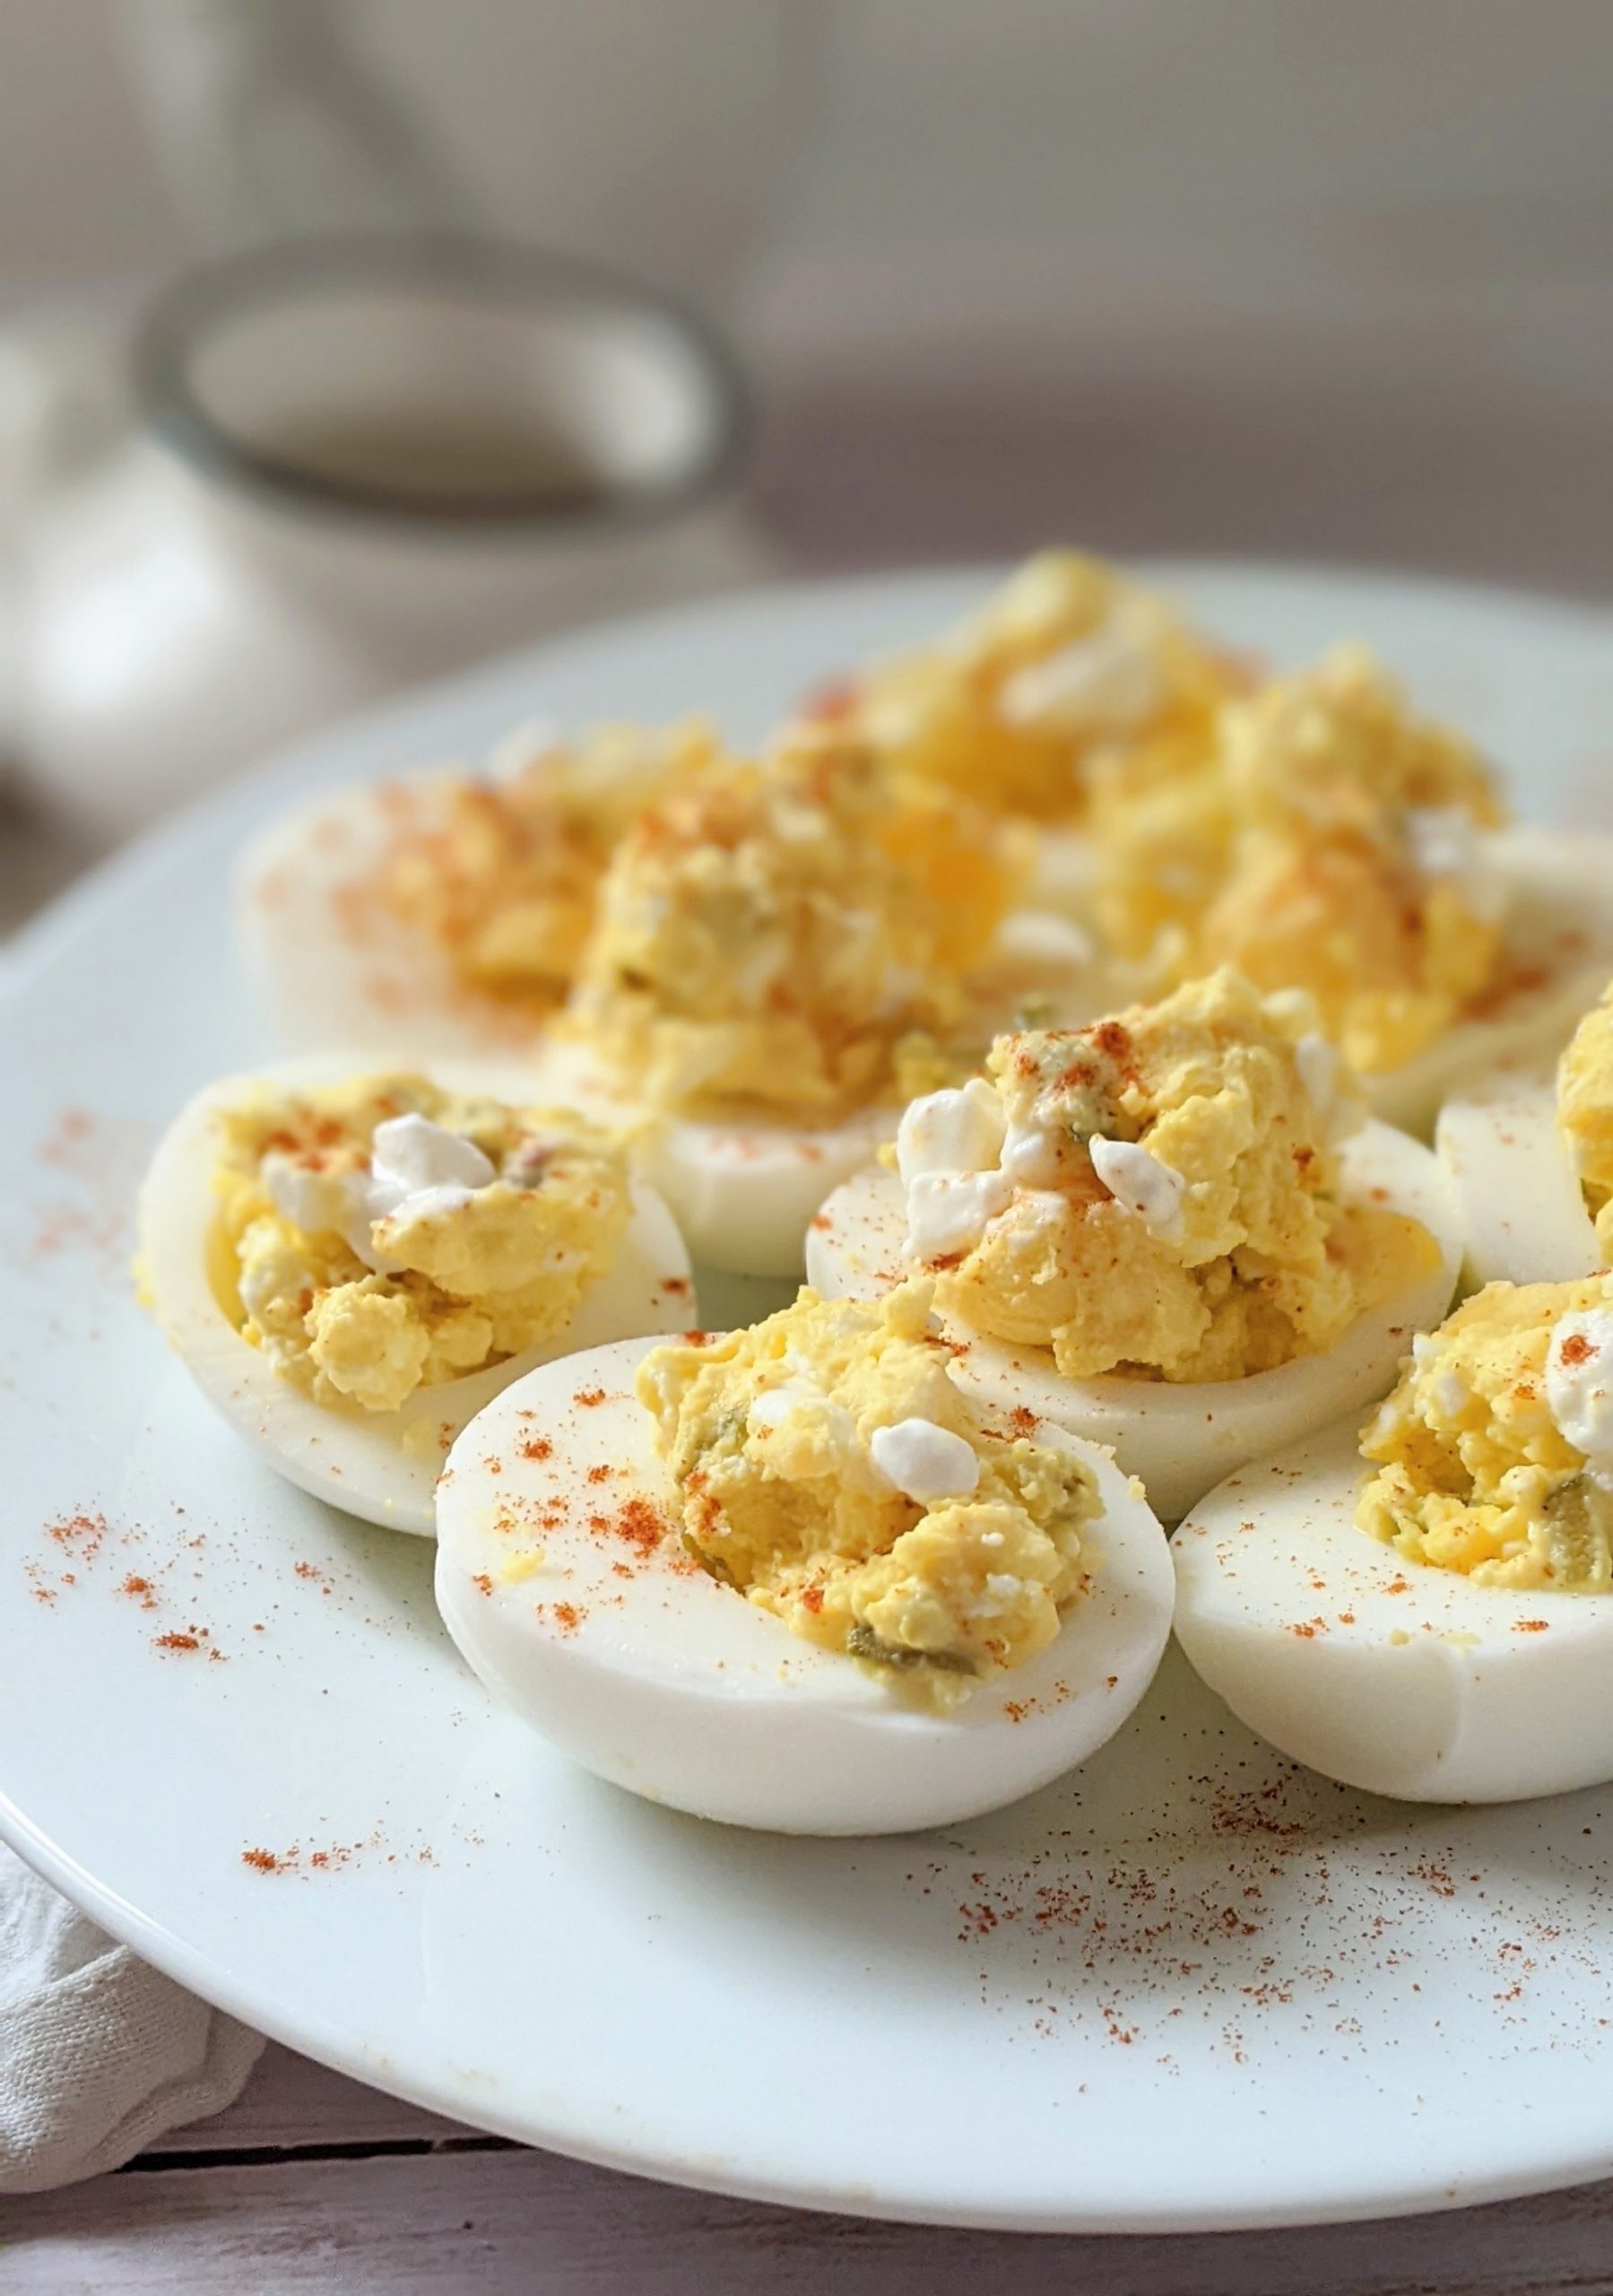 high protein deviled egg recipes without mayonnaise add cheese to deviled eggs more protein appetizers for parties game day midwestern recipes